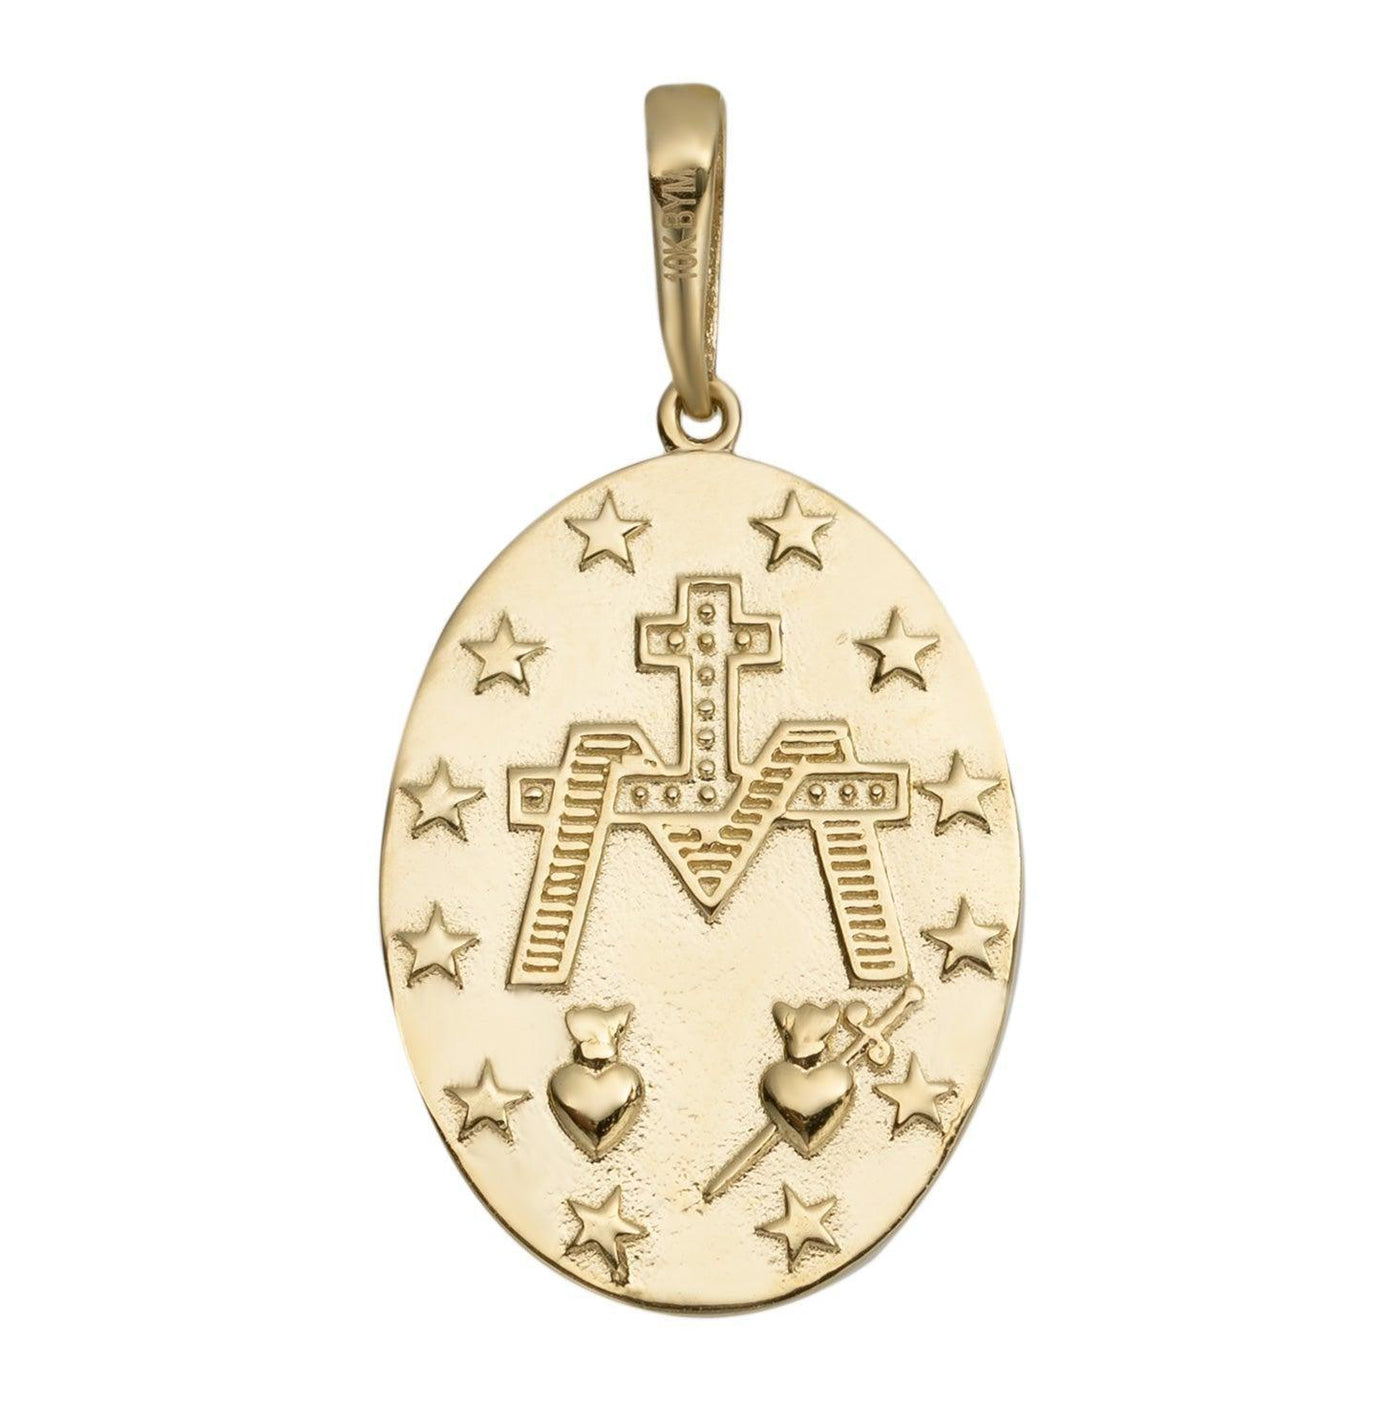 Oval Textured Miraculous Mary Pendant Solid 10K Yellow Gold - bayamjewelry